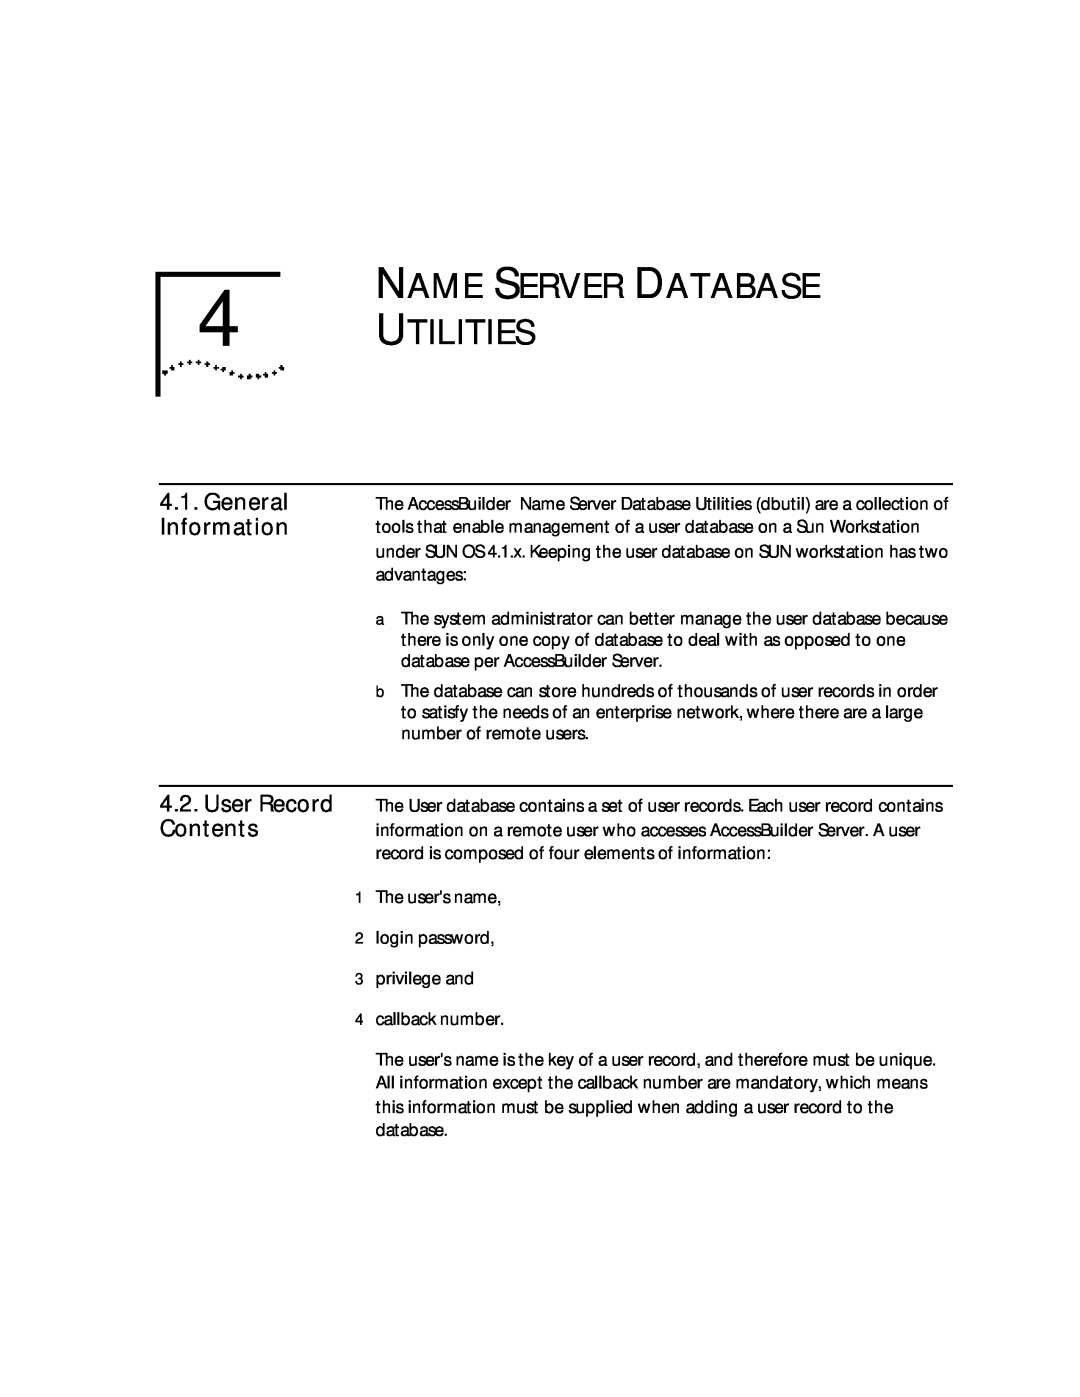 3Com 09-0704-001 manual NAME SERVER DATABASE 4 UTILITIES, General Information, User Record Contents 